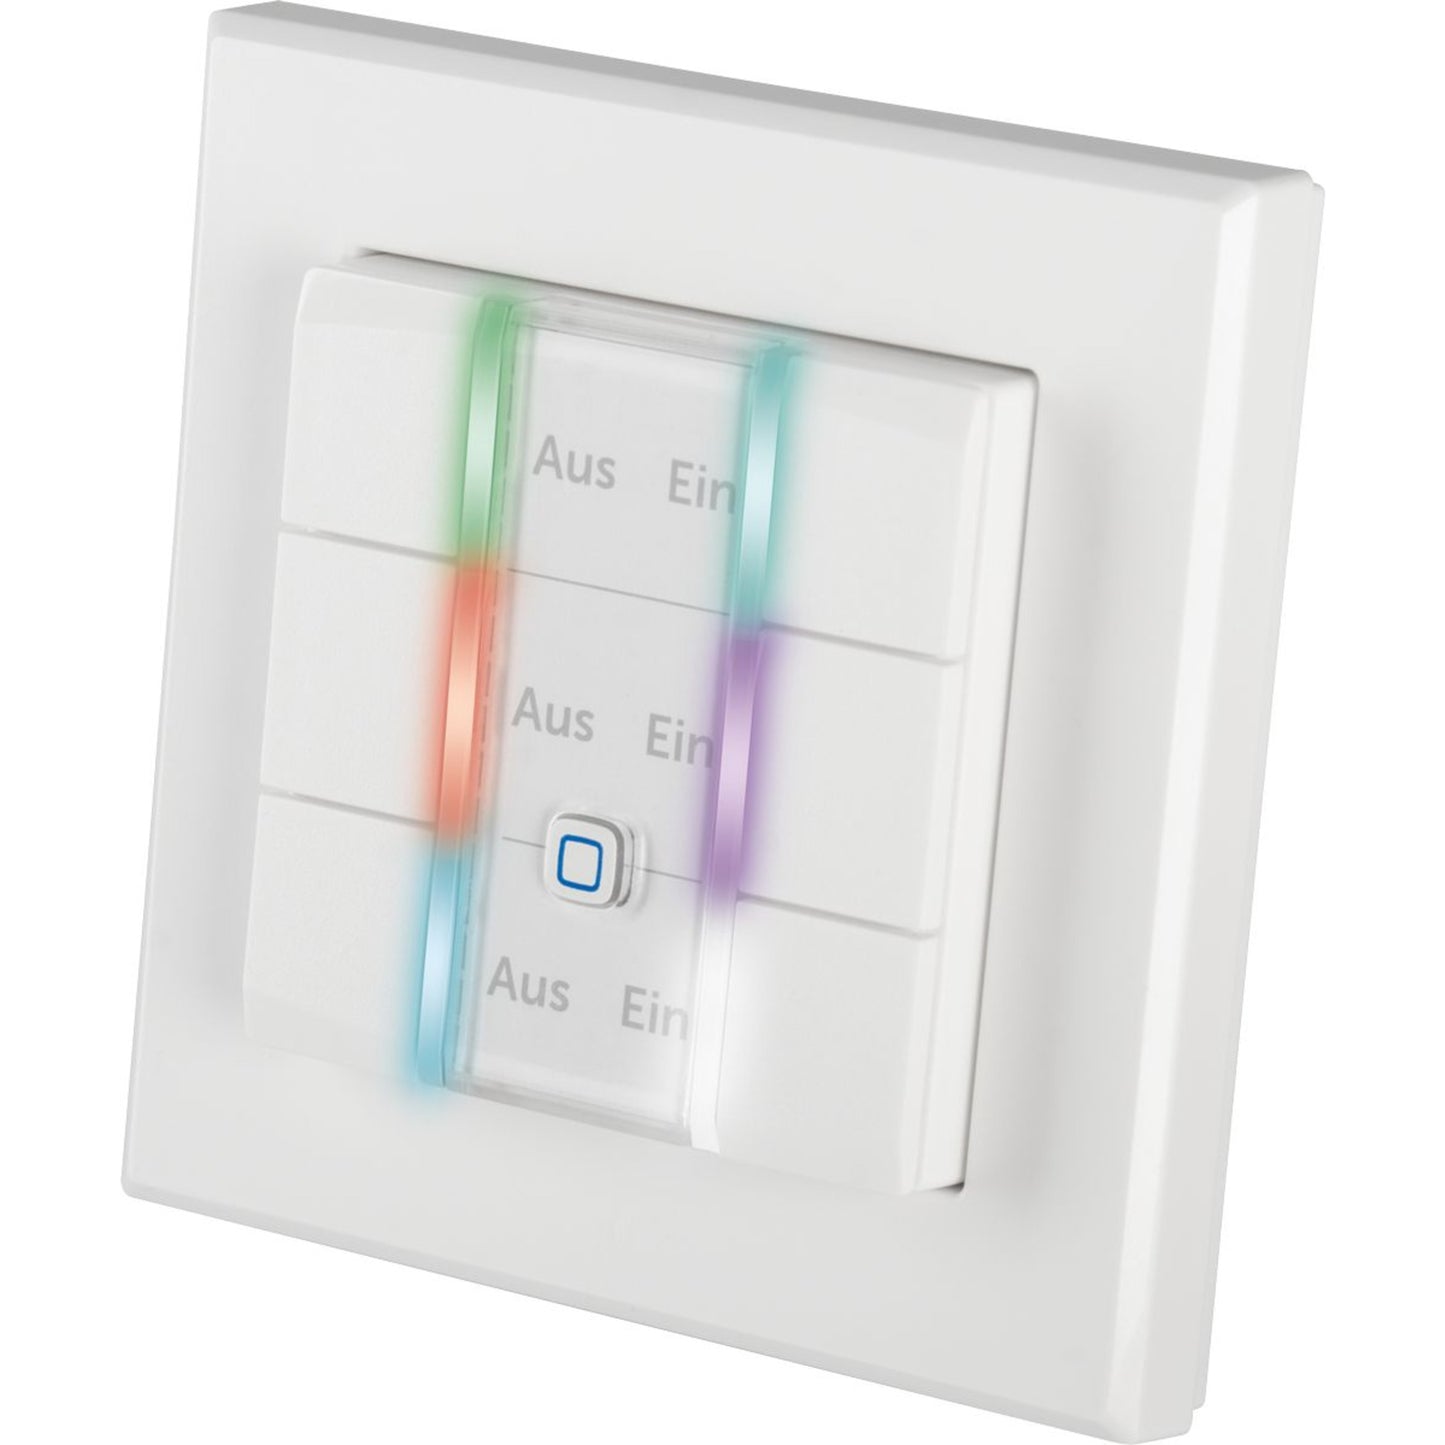 Homematic IP Wired Smart Home Wandtaster HmIPW-WRC6, 6-fach, mit LEDs 6 x HmIPW-WTH Sparset